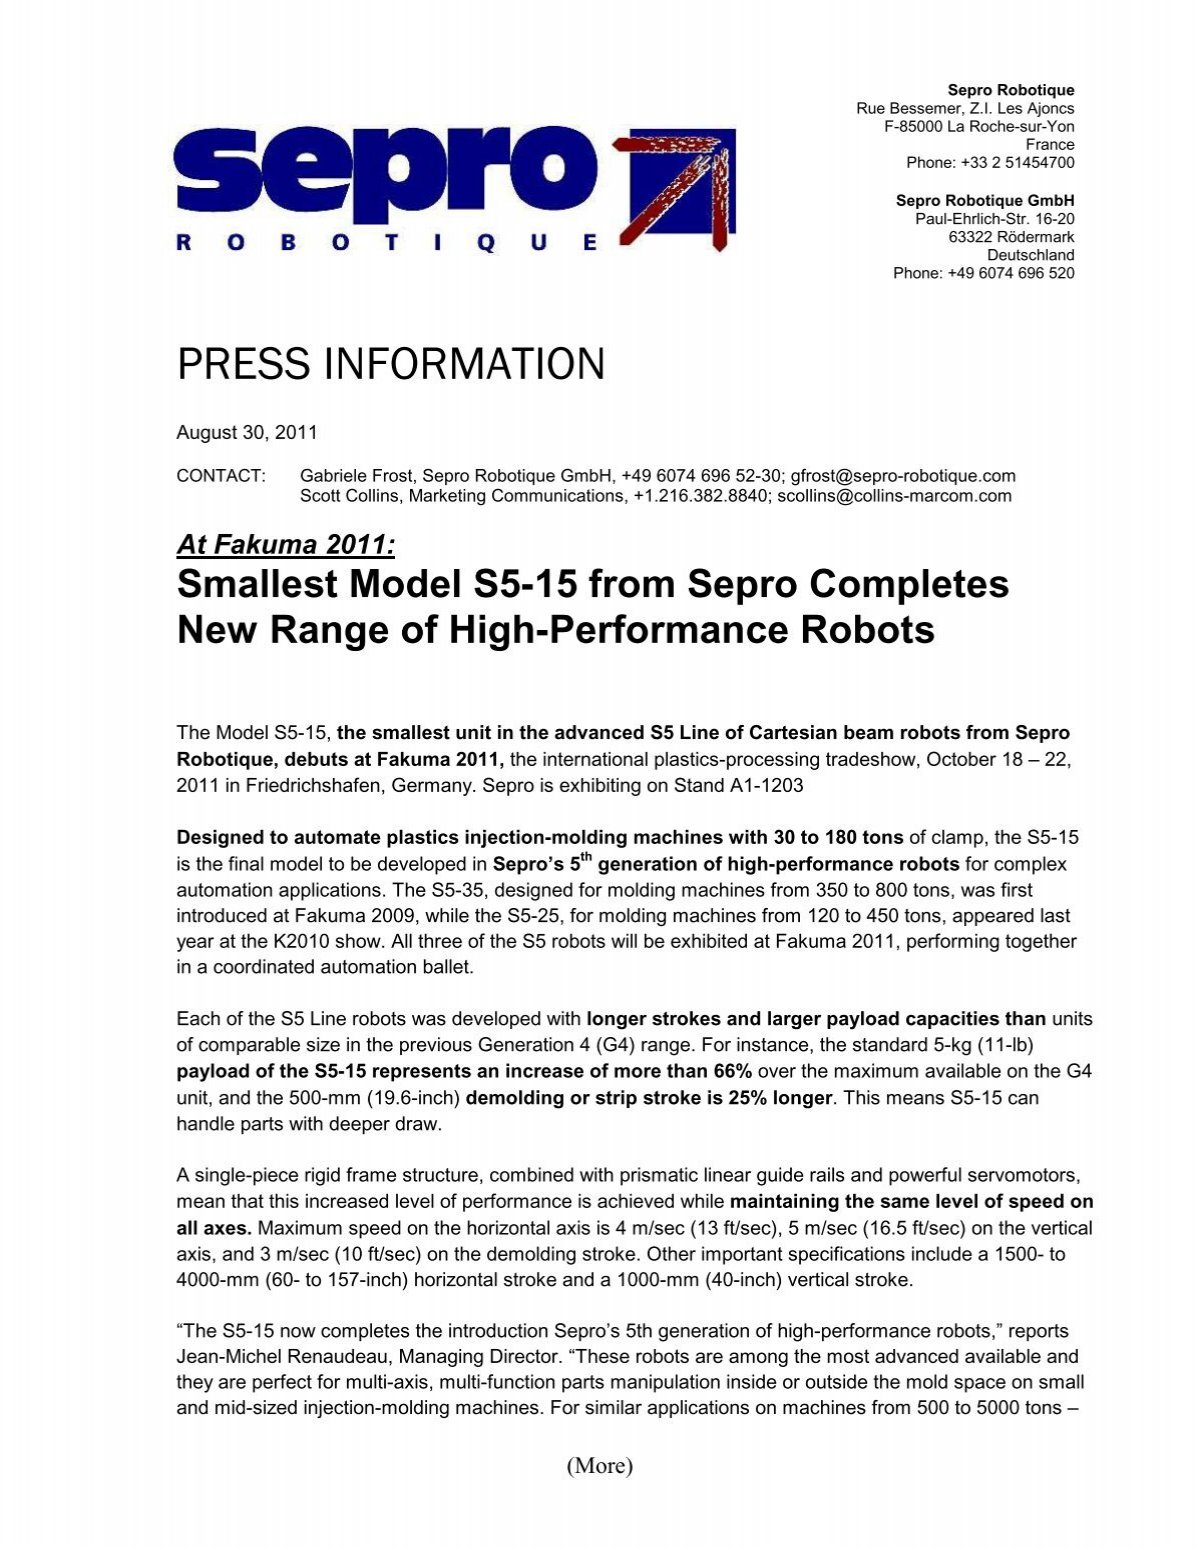 Smallest Model S5-15 from Completes Range High ...